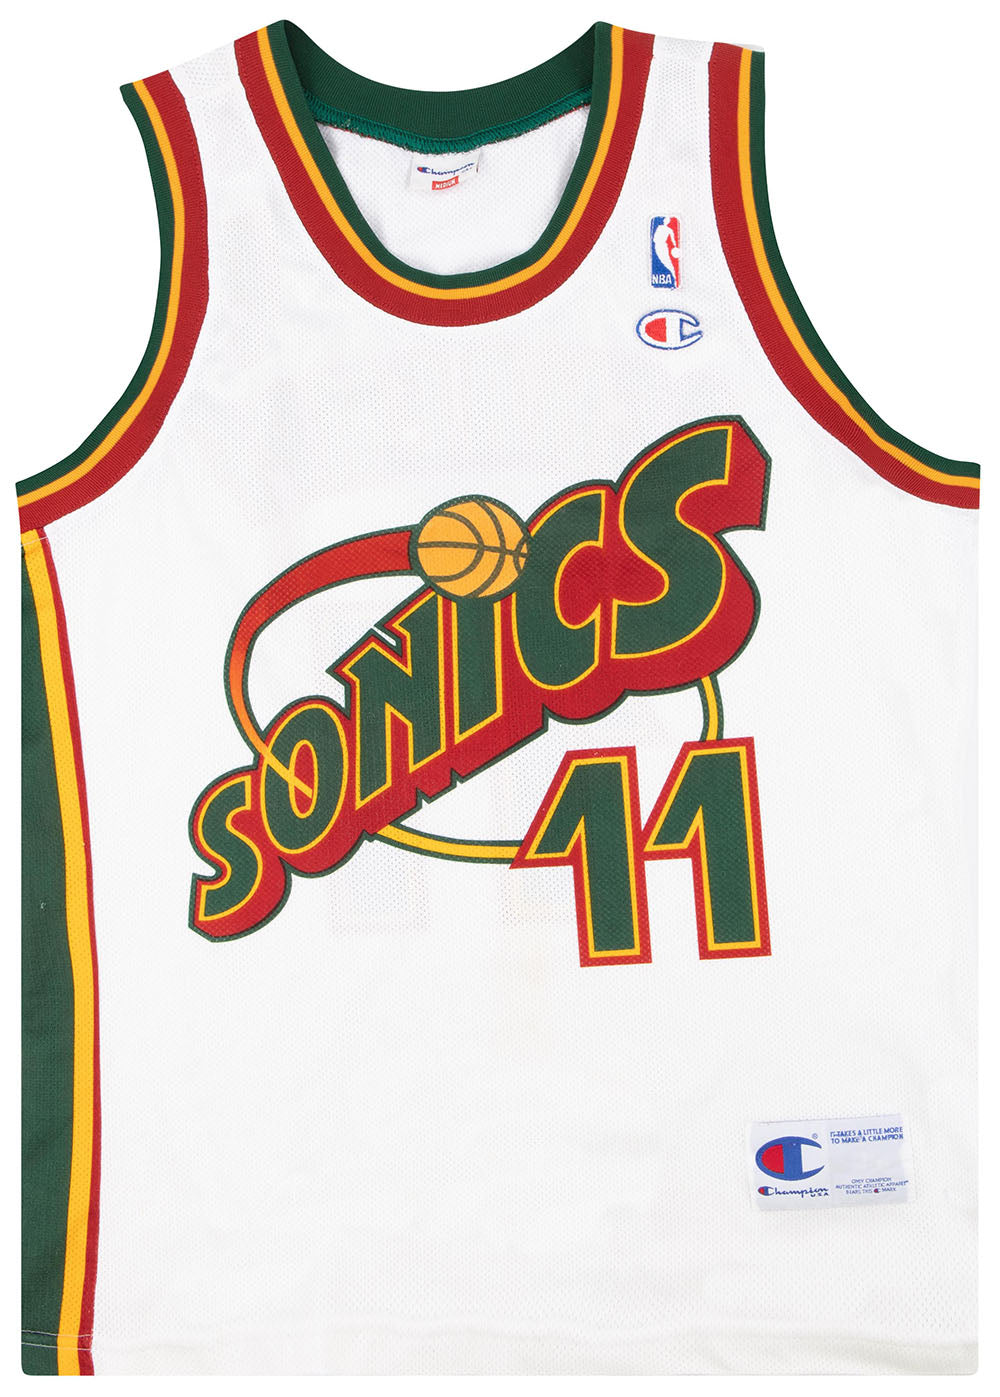 NBA 2K19: 1995-1996 Seattle Supersonics Player Ratings and Roster